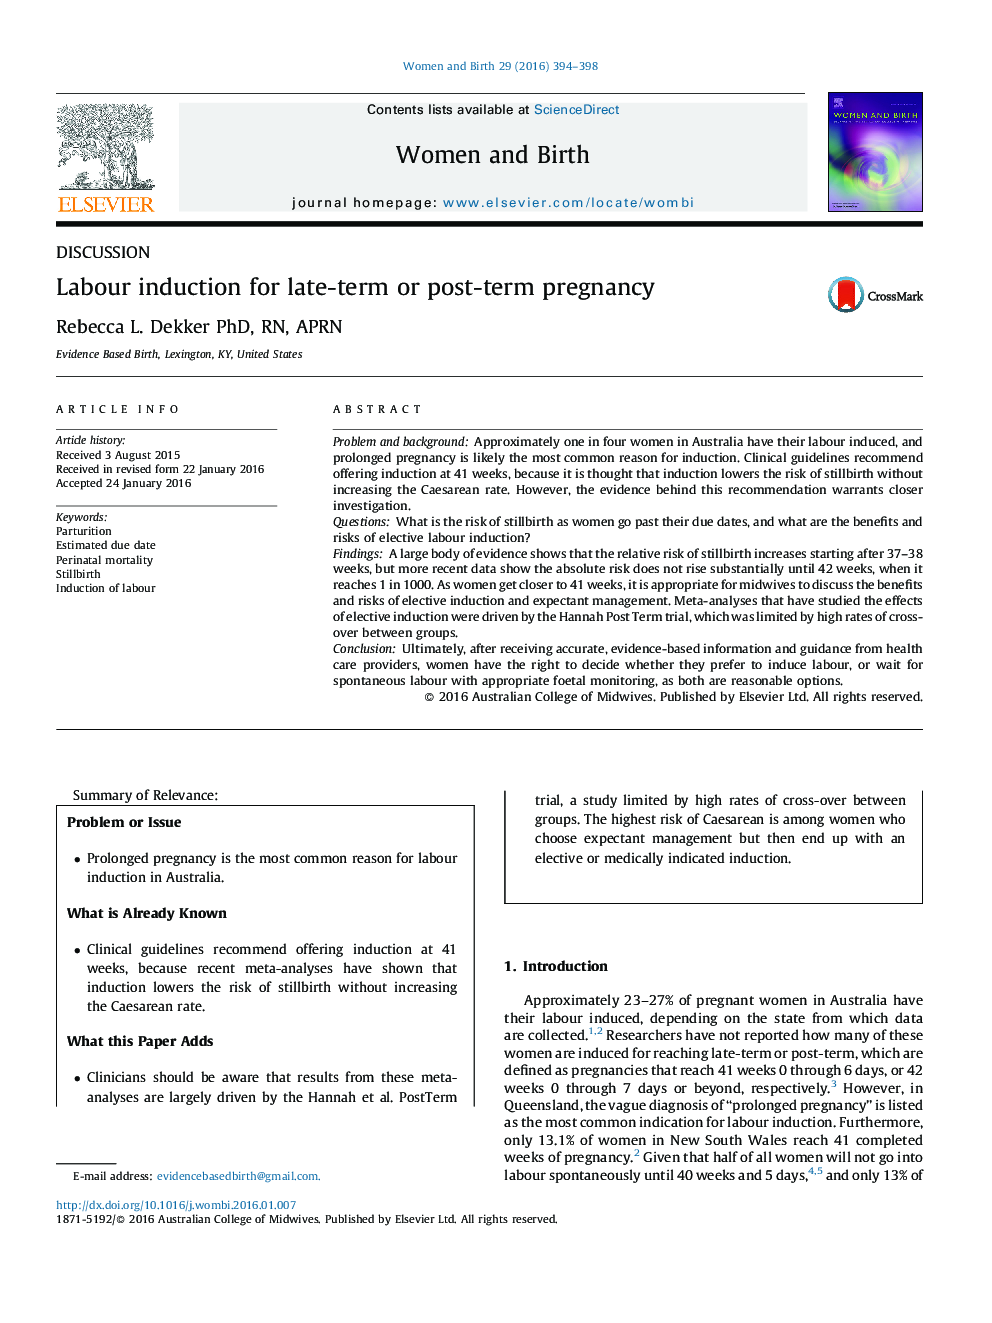 Labour induction for late-term or post-term pregnancy